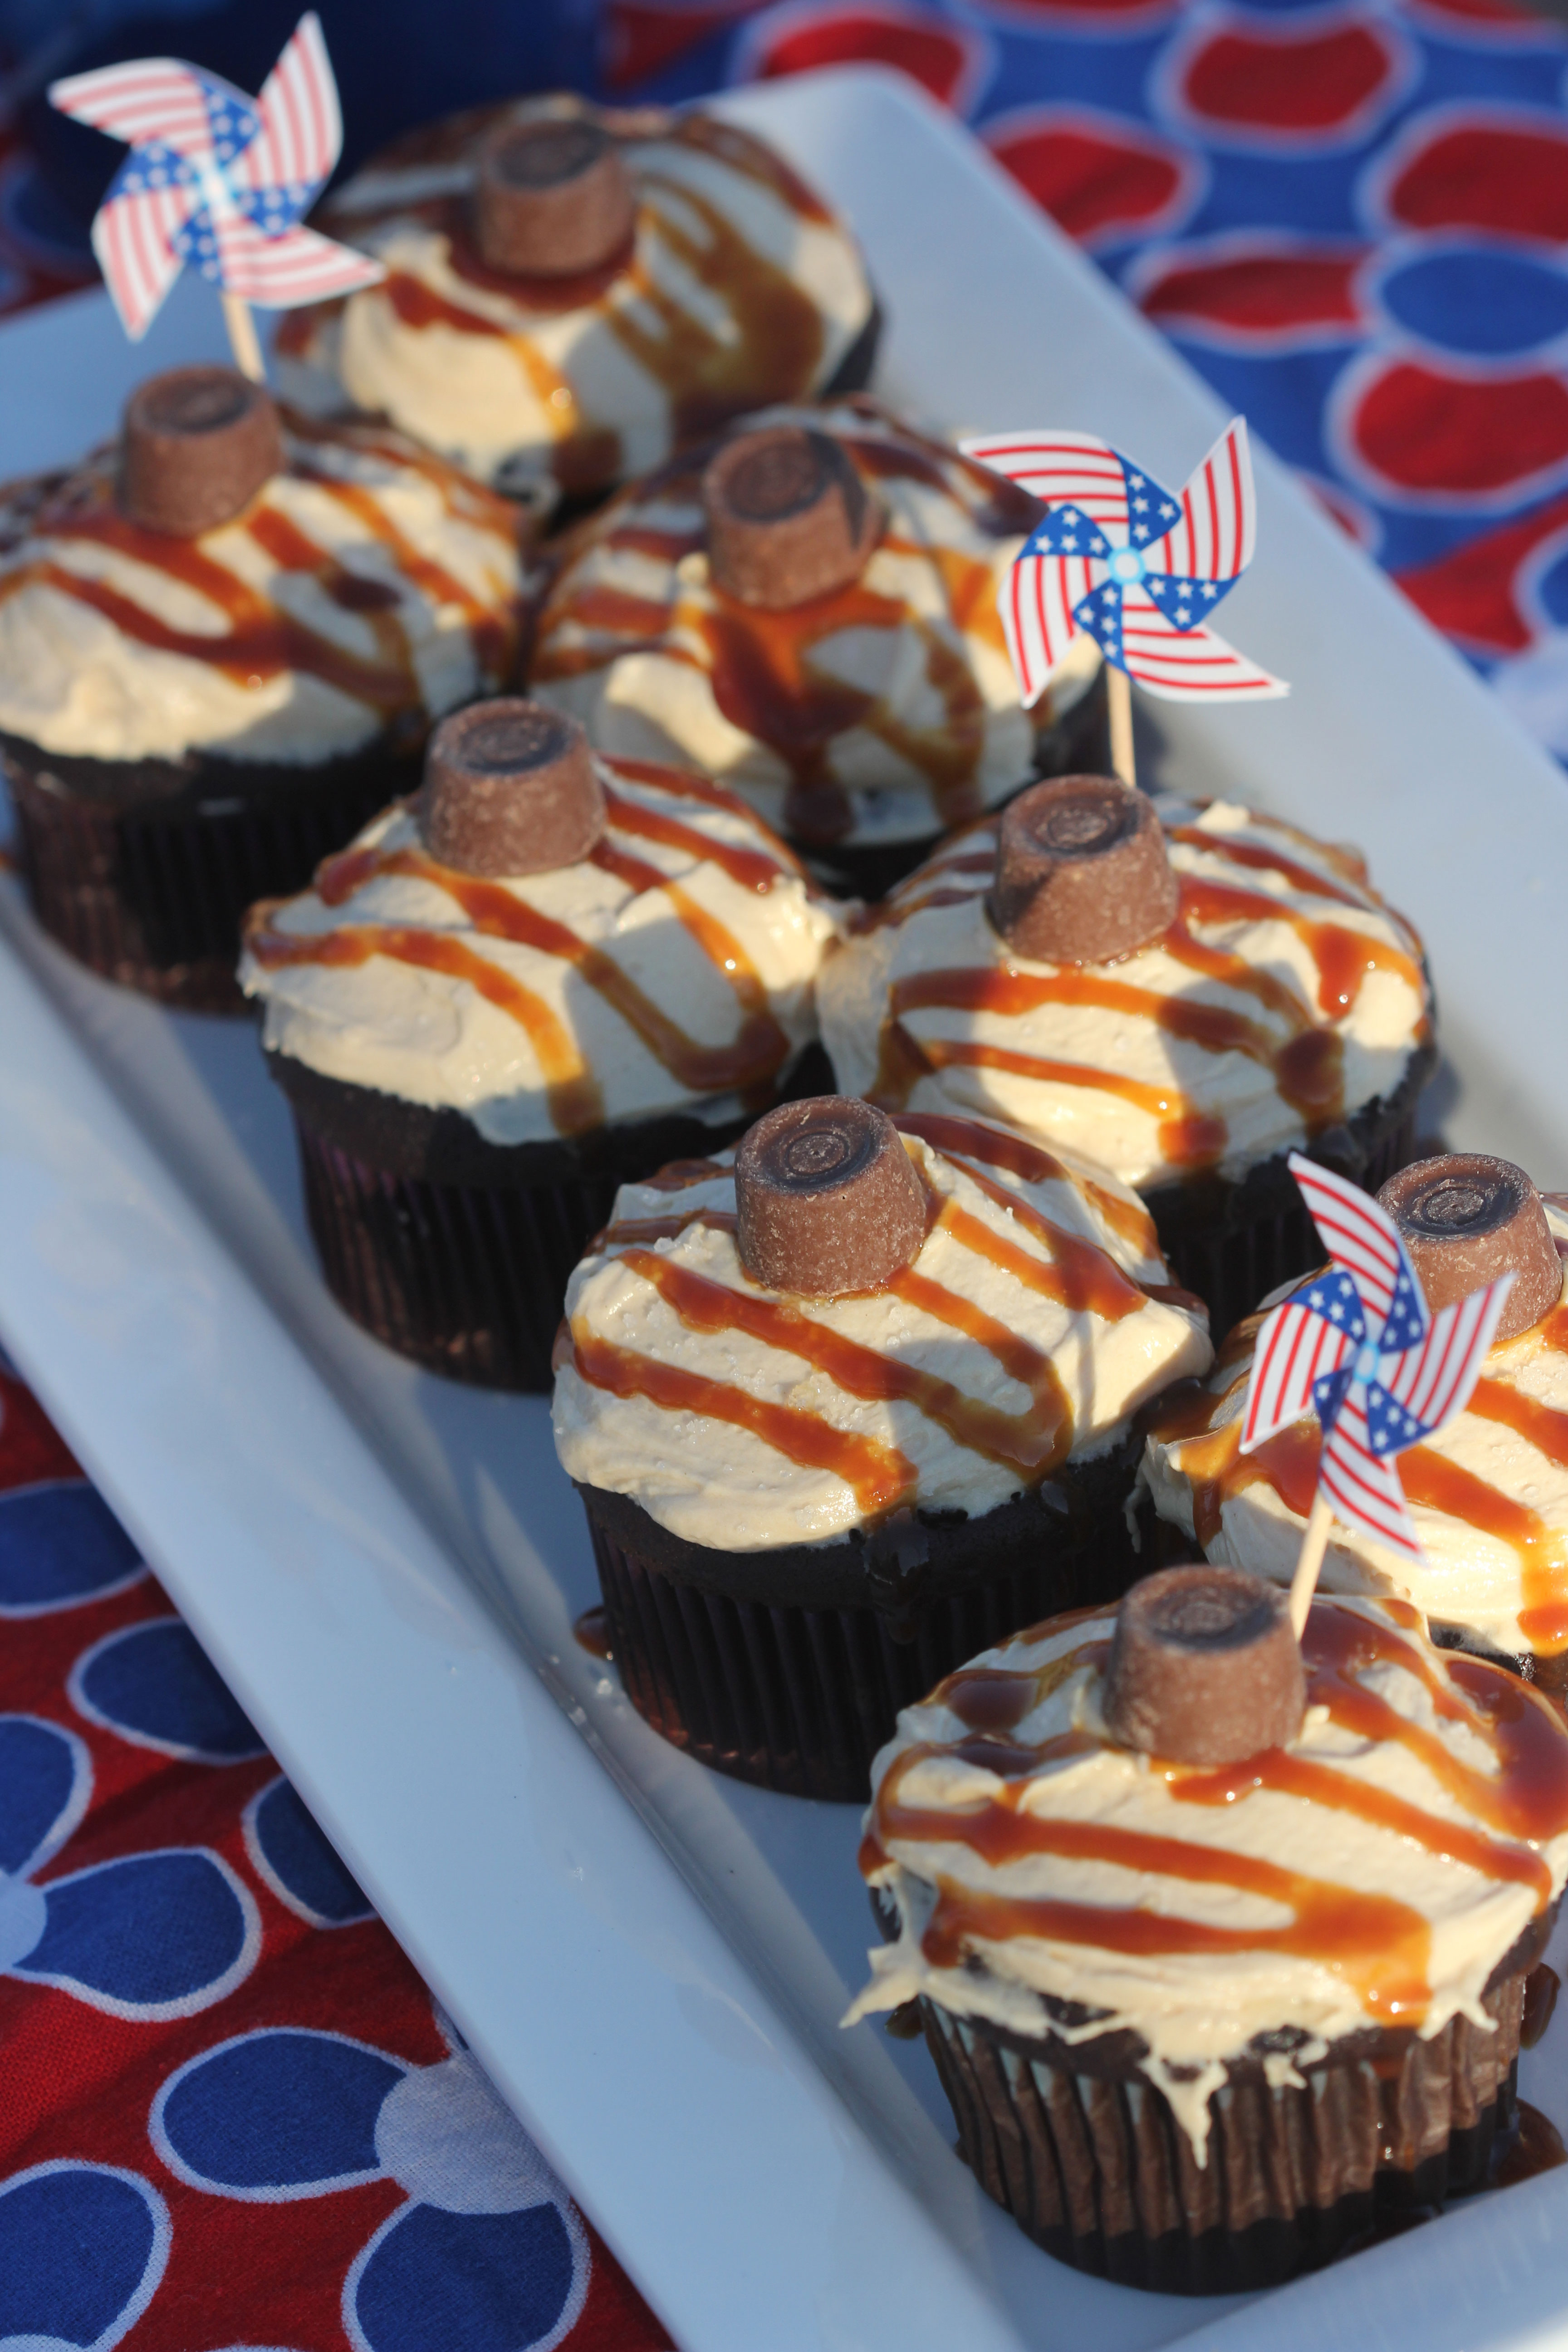 These salted caramel frosted chocolate cupcakes are so good! The right mix of chocolate and salty caramel that one is not enough of this sweet treat!